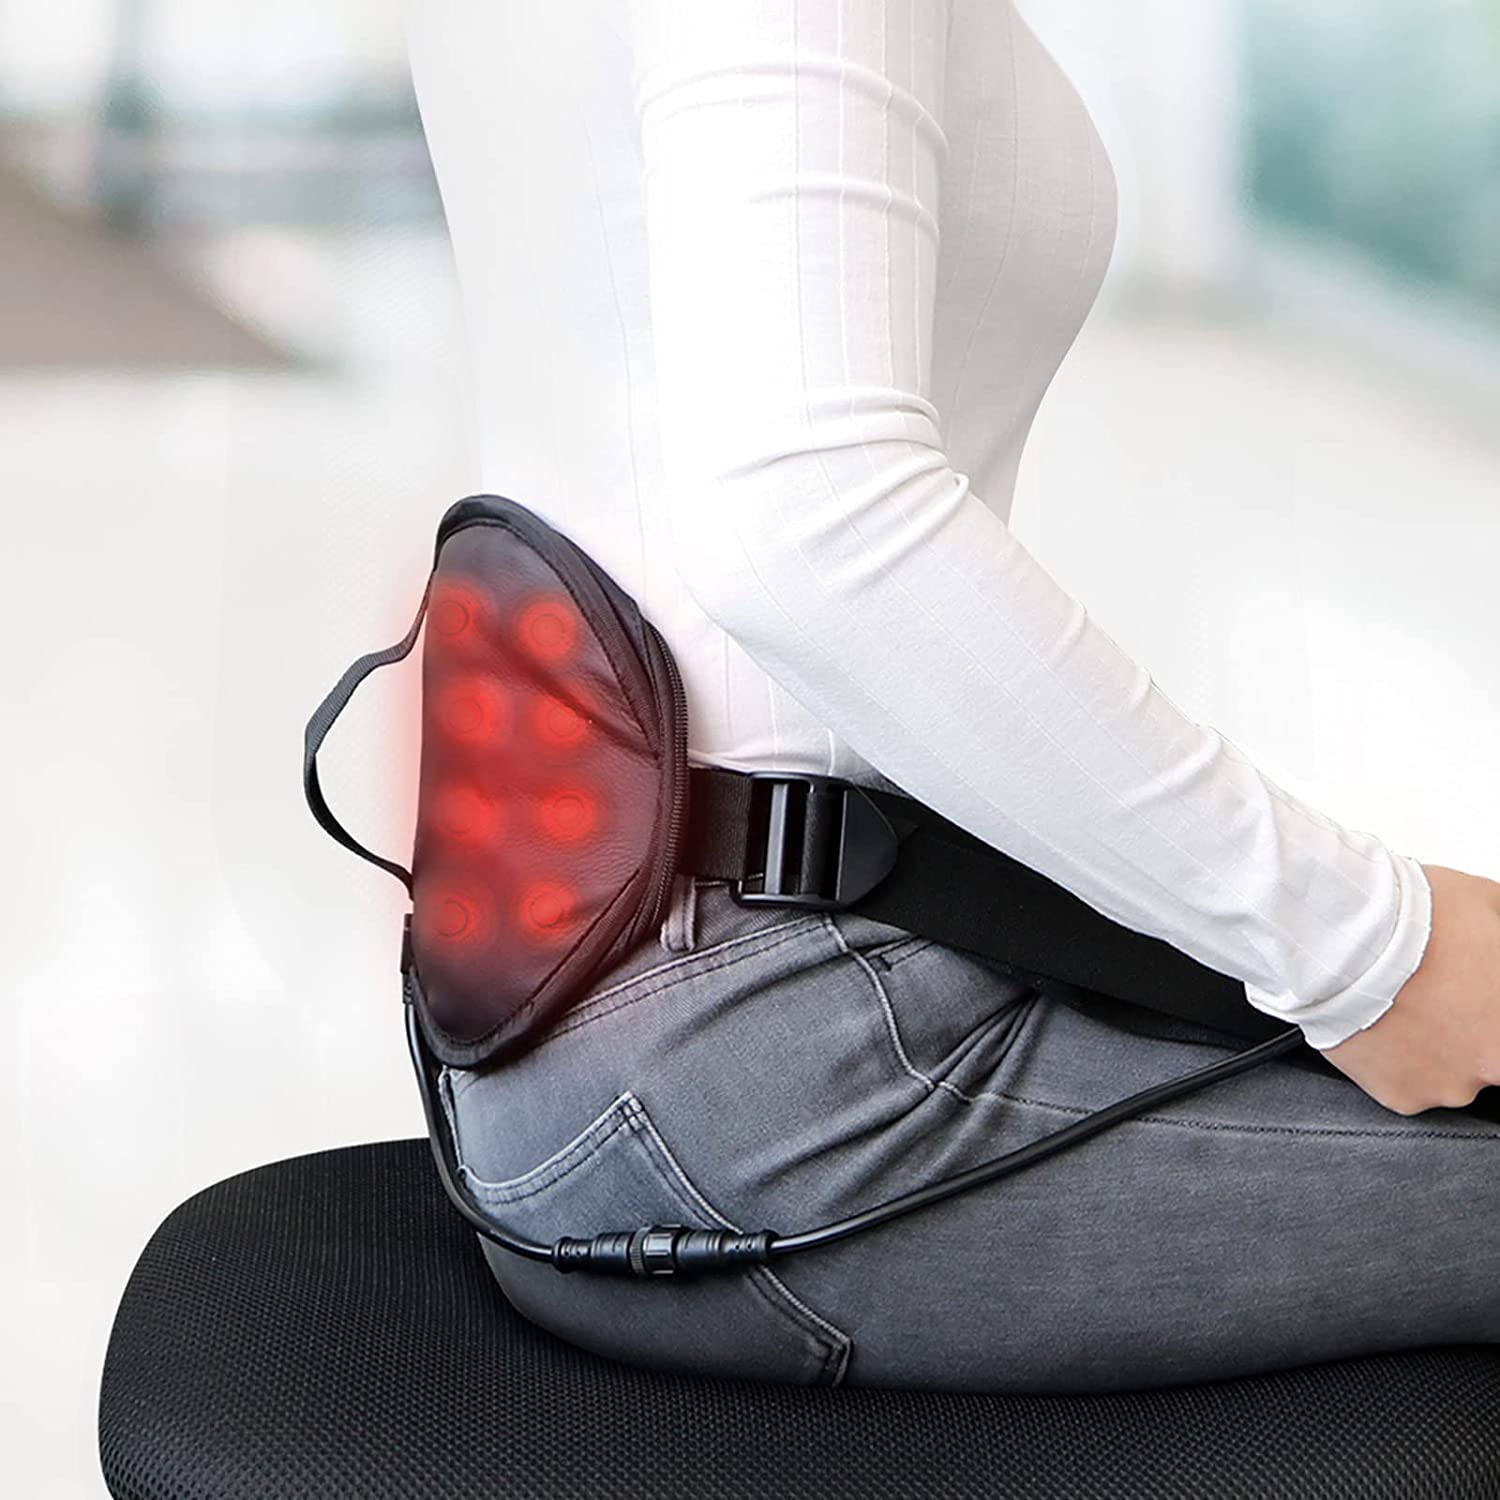 Buy the Best Infrared Heating Pads for Back Pain at These Prices 2